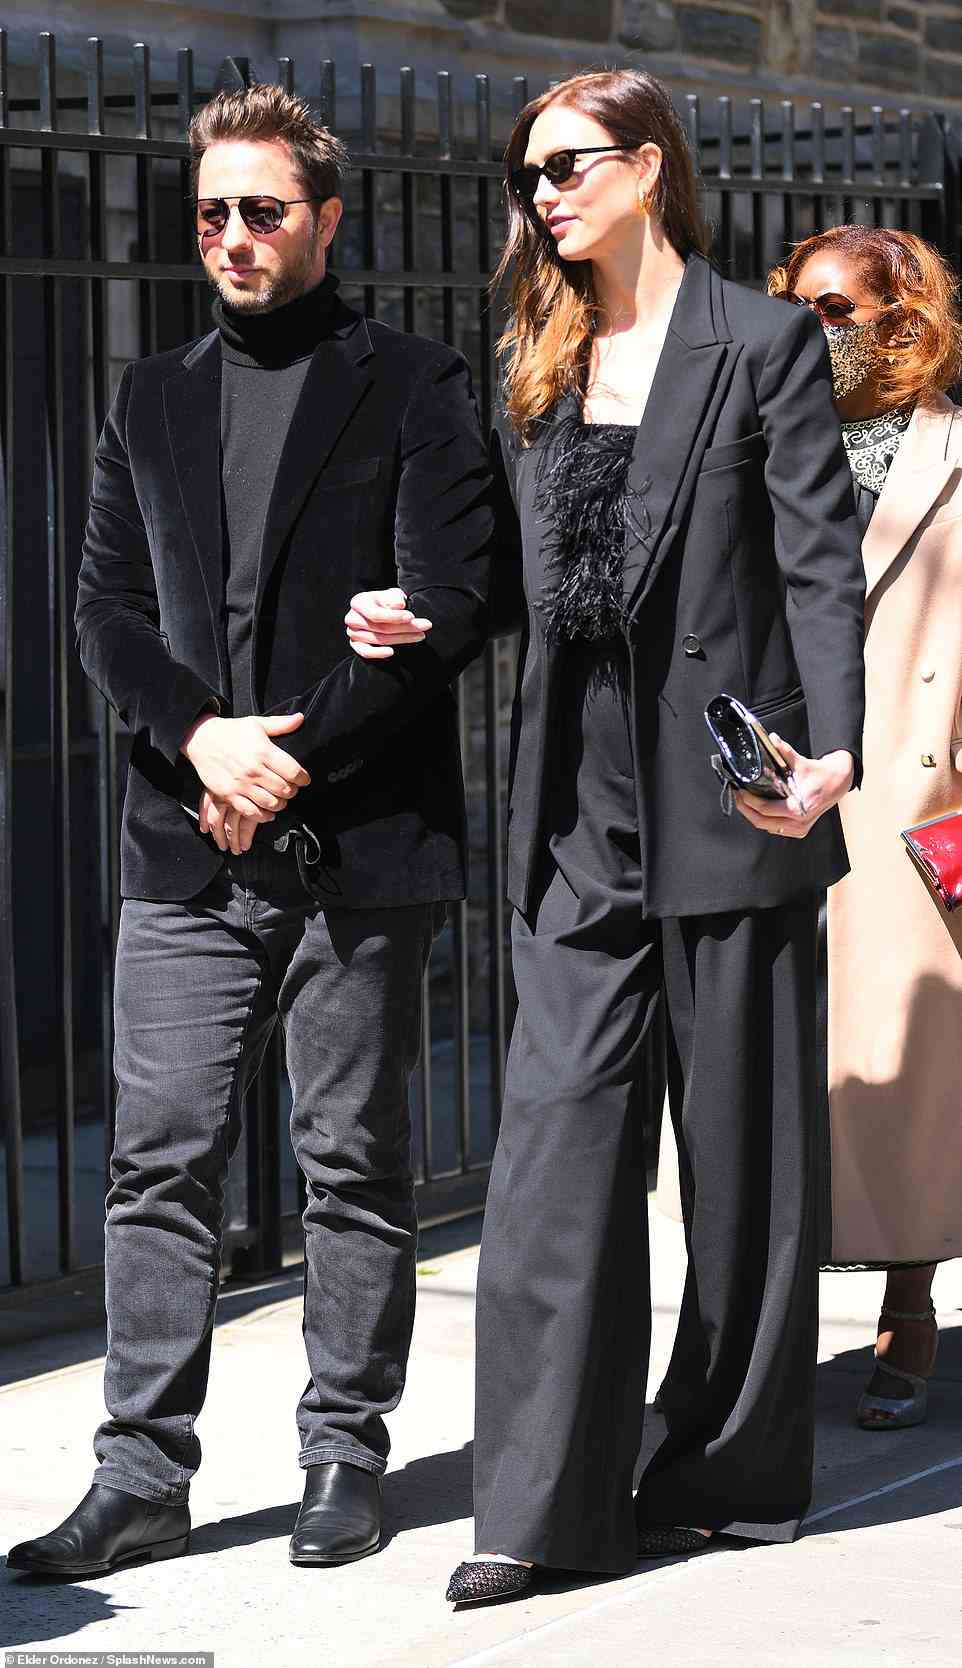 Karlie Kloss was spotted entering the memorial with longtime friend and journalist Derek Blasberg. She donned black flowing pants, a feathered black top and a matching blazer. She also wore dark sunglasses as she walked into the Harlem church